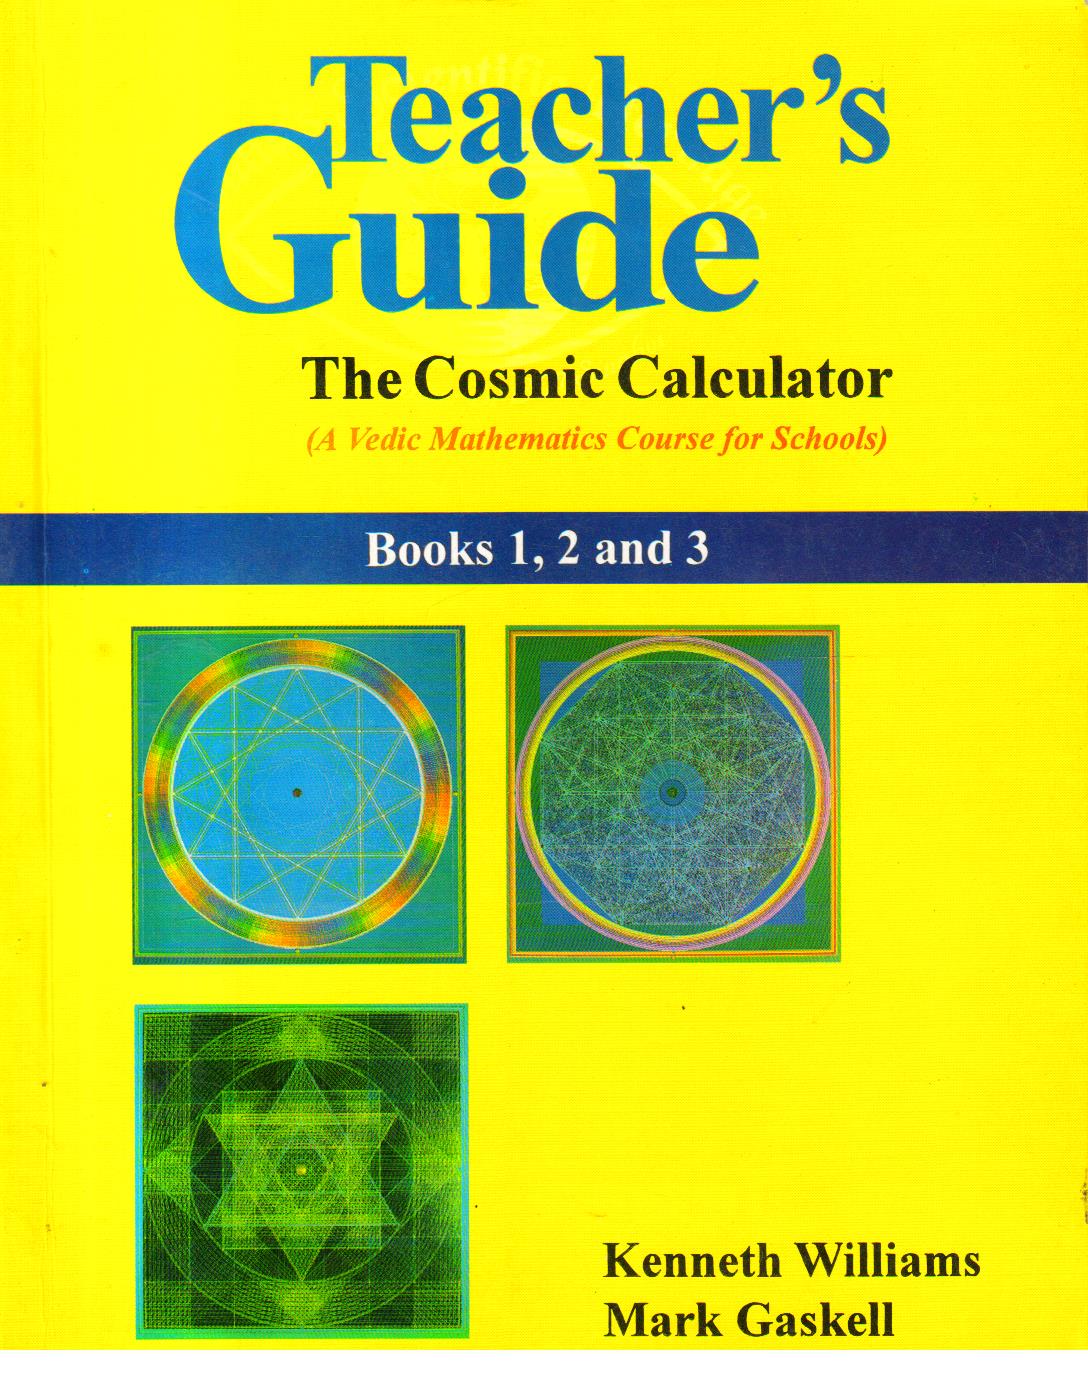 Teachers Guide the Cosmic Calculater.